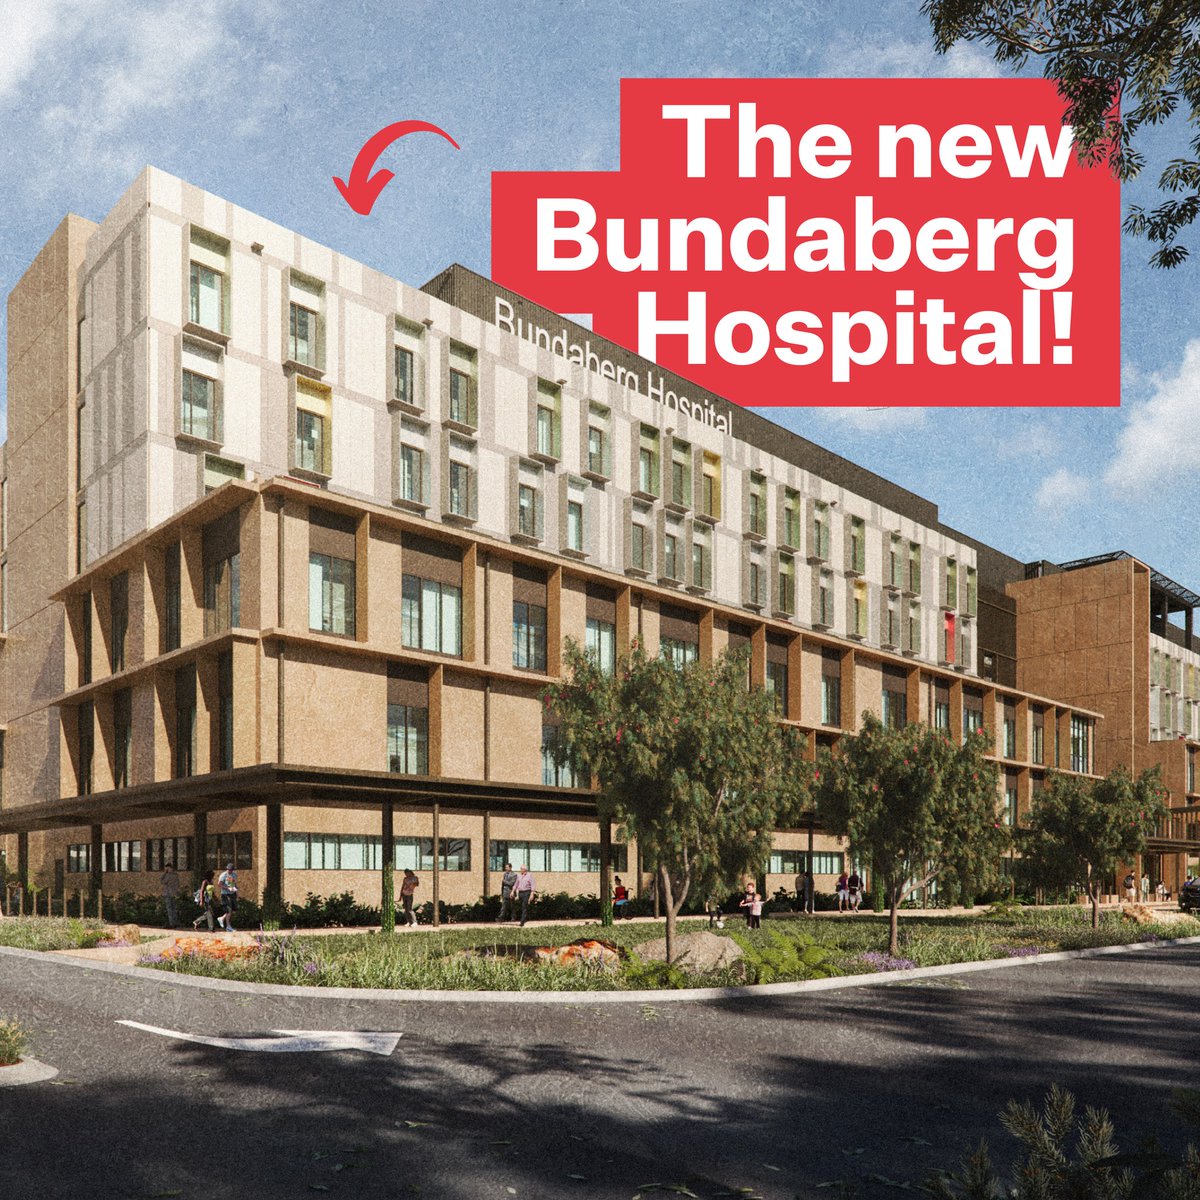 Here's your first look at the new Bundaberg Hospital! It'll be home to over 400 beds (an uplift of 121 beds for the region), additional operating theatres, an expanded emergency department, and a wider range of outpatient and diagnostic services.